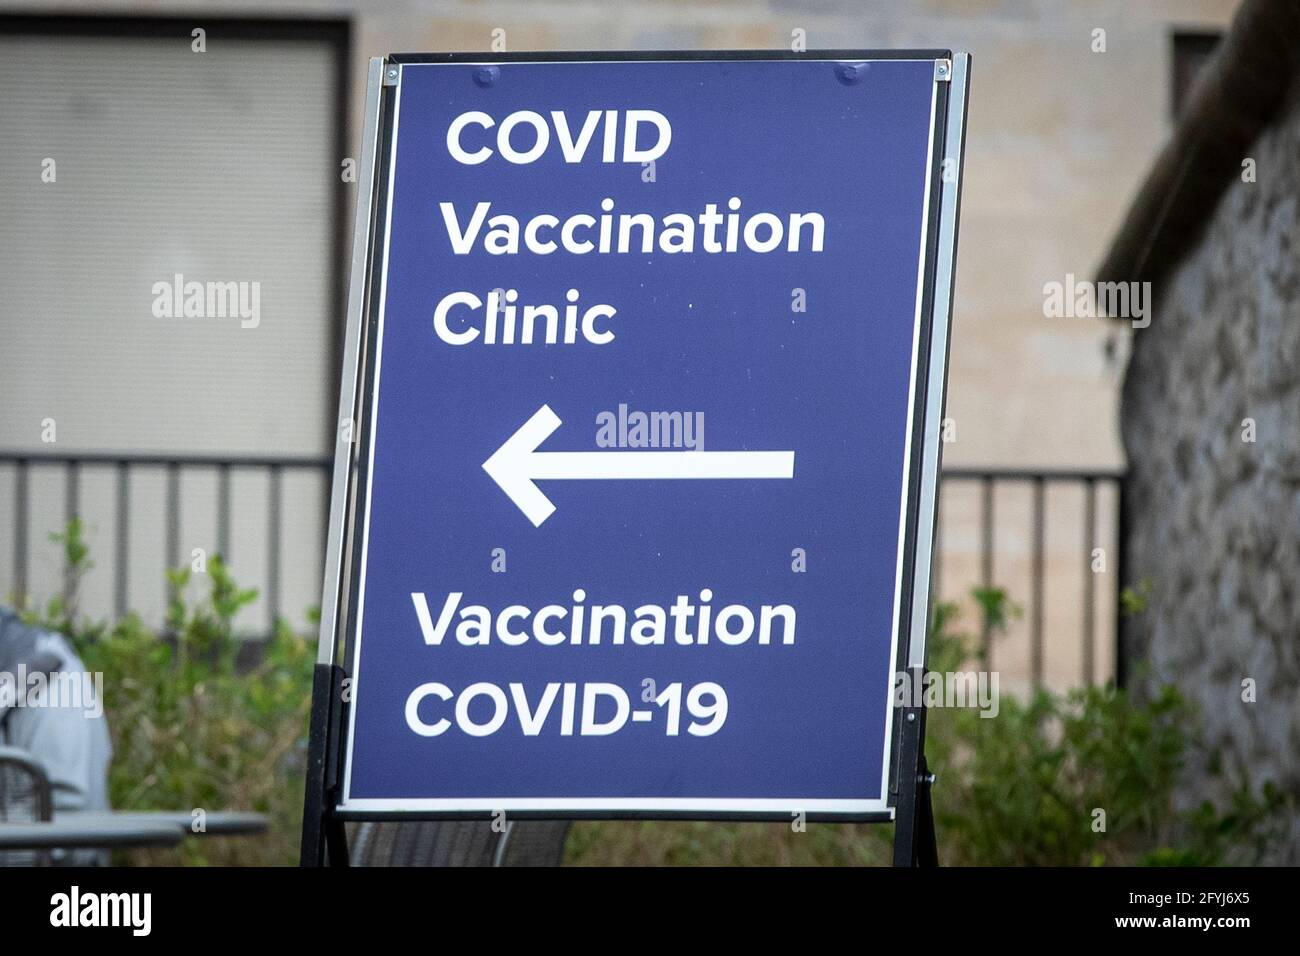 A sign outside the COVID-19 vaccine clinic at Kingston general hospital (KGH) in Kingston, Ontario on Thursday May 20, 2021. Stock Photo